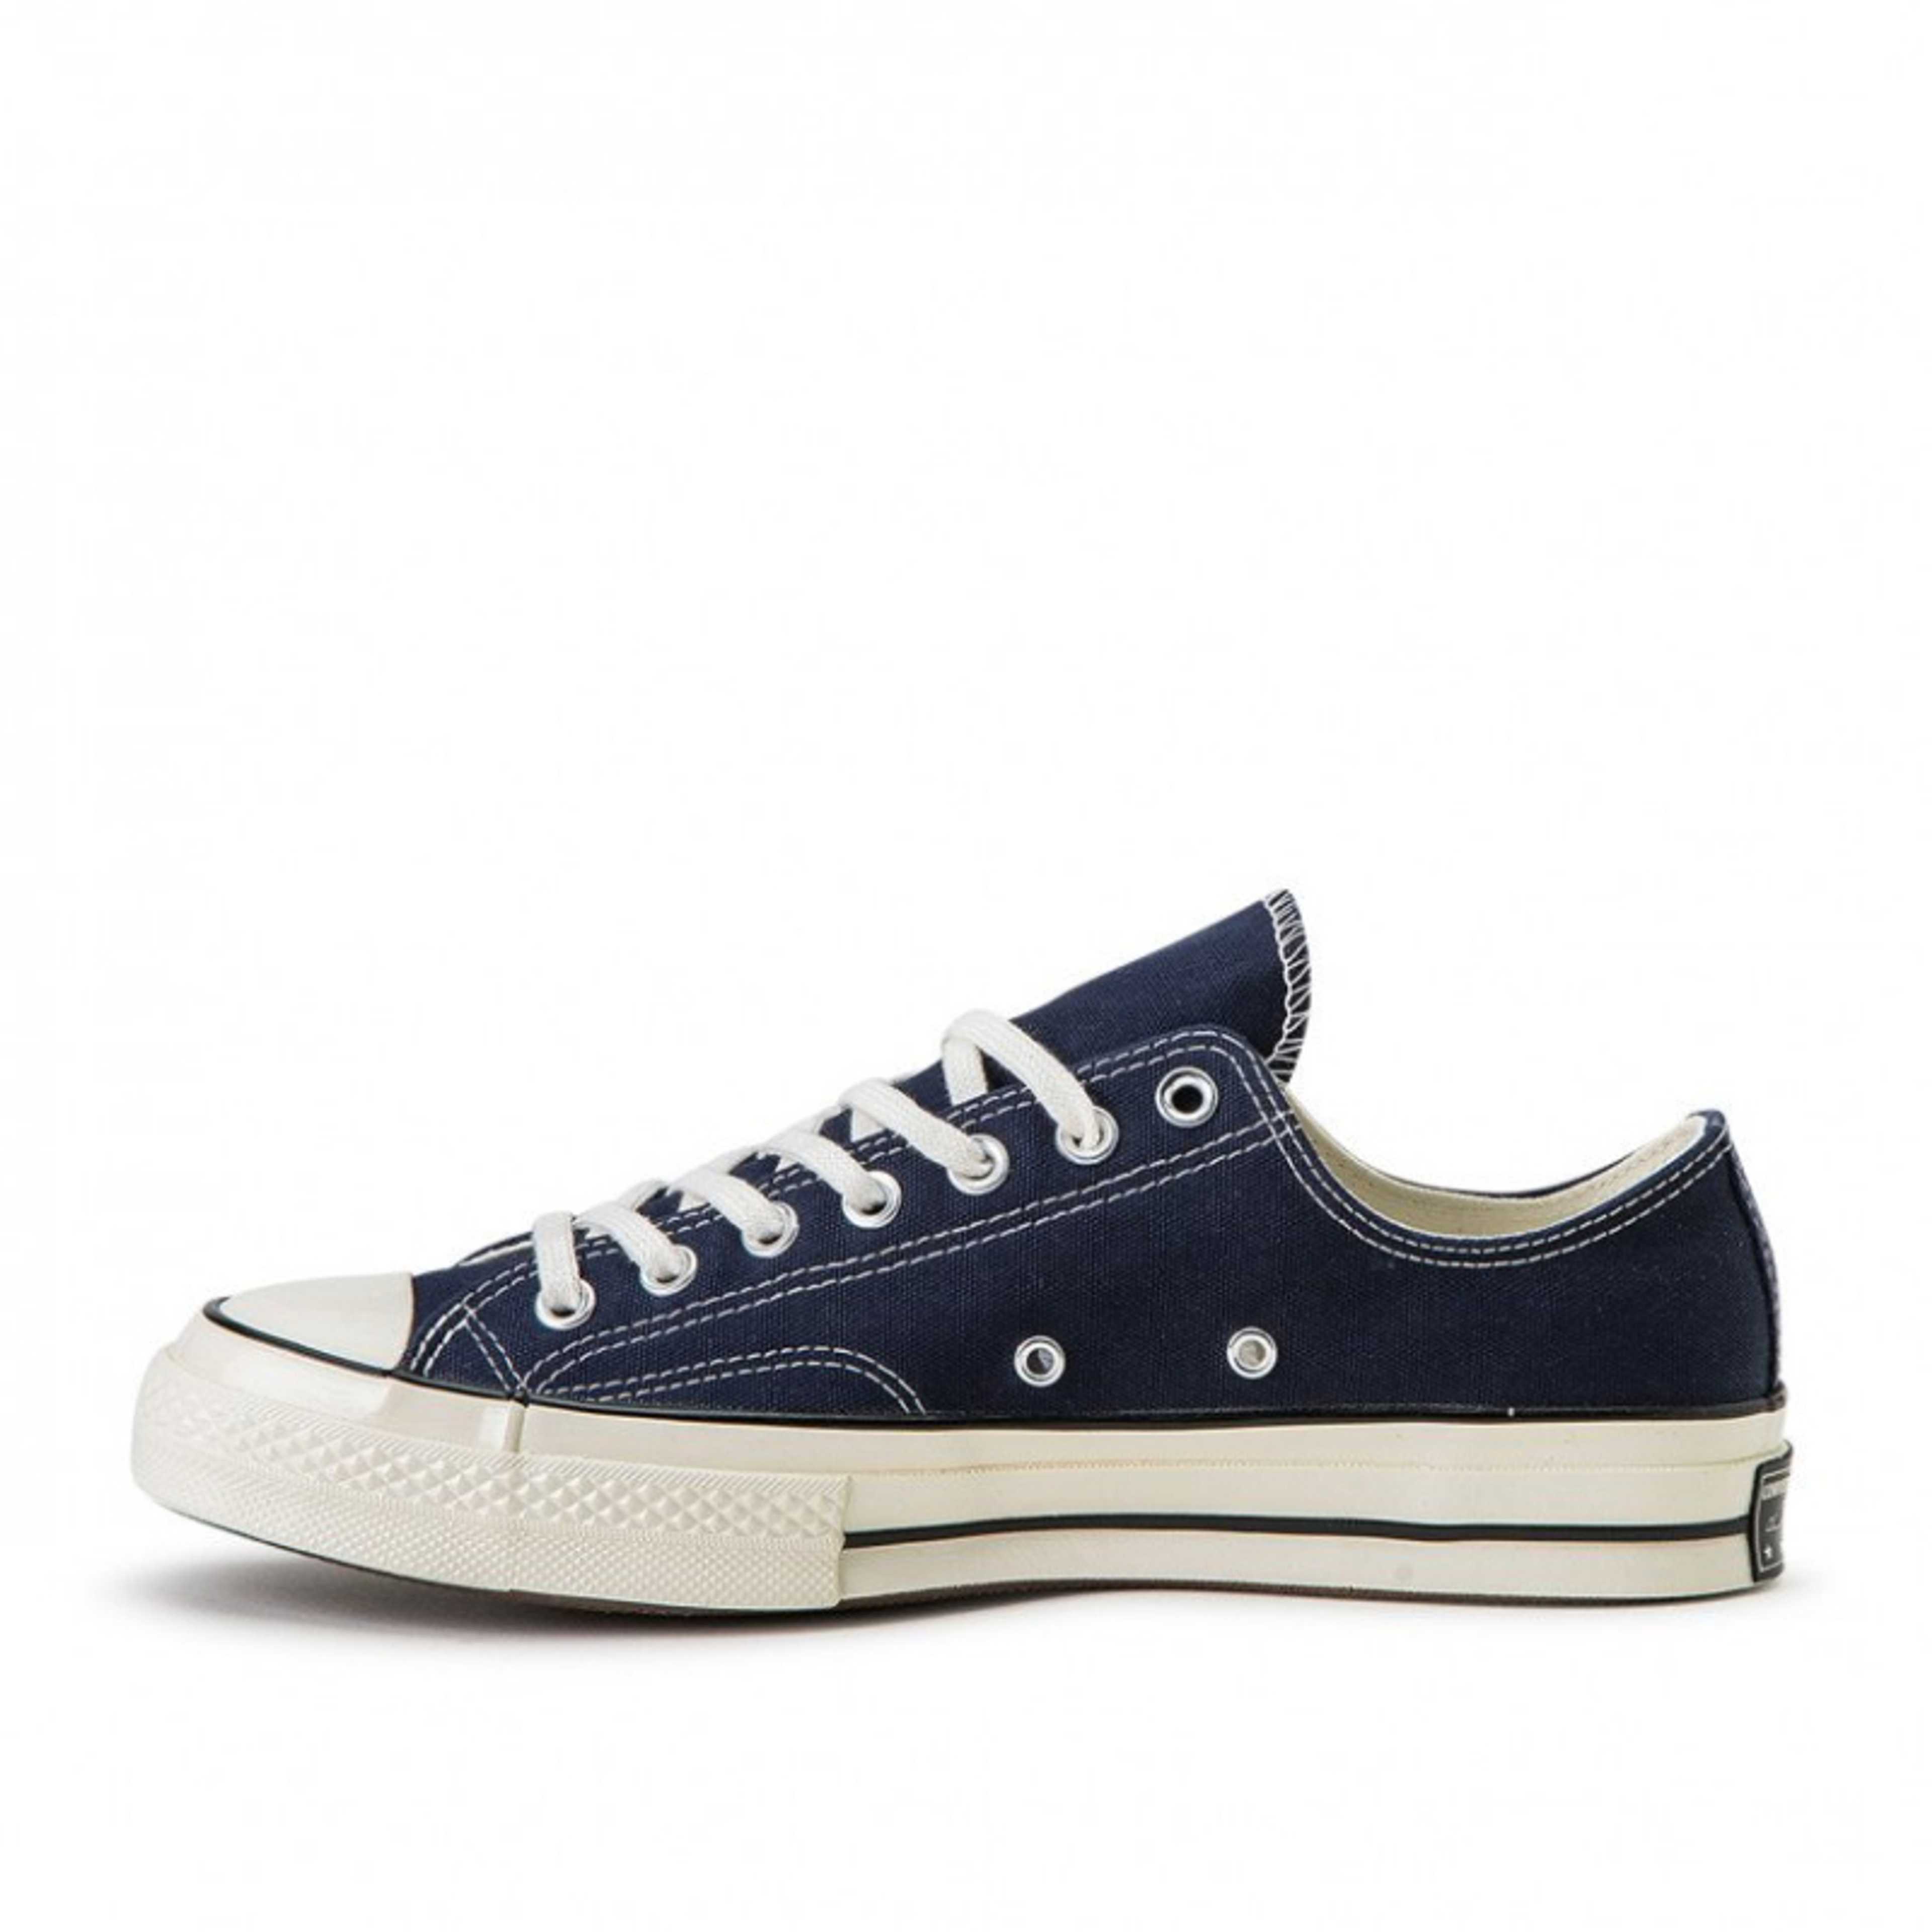 New Chuck 70 low-top sneakers-8